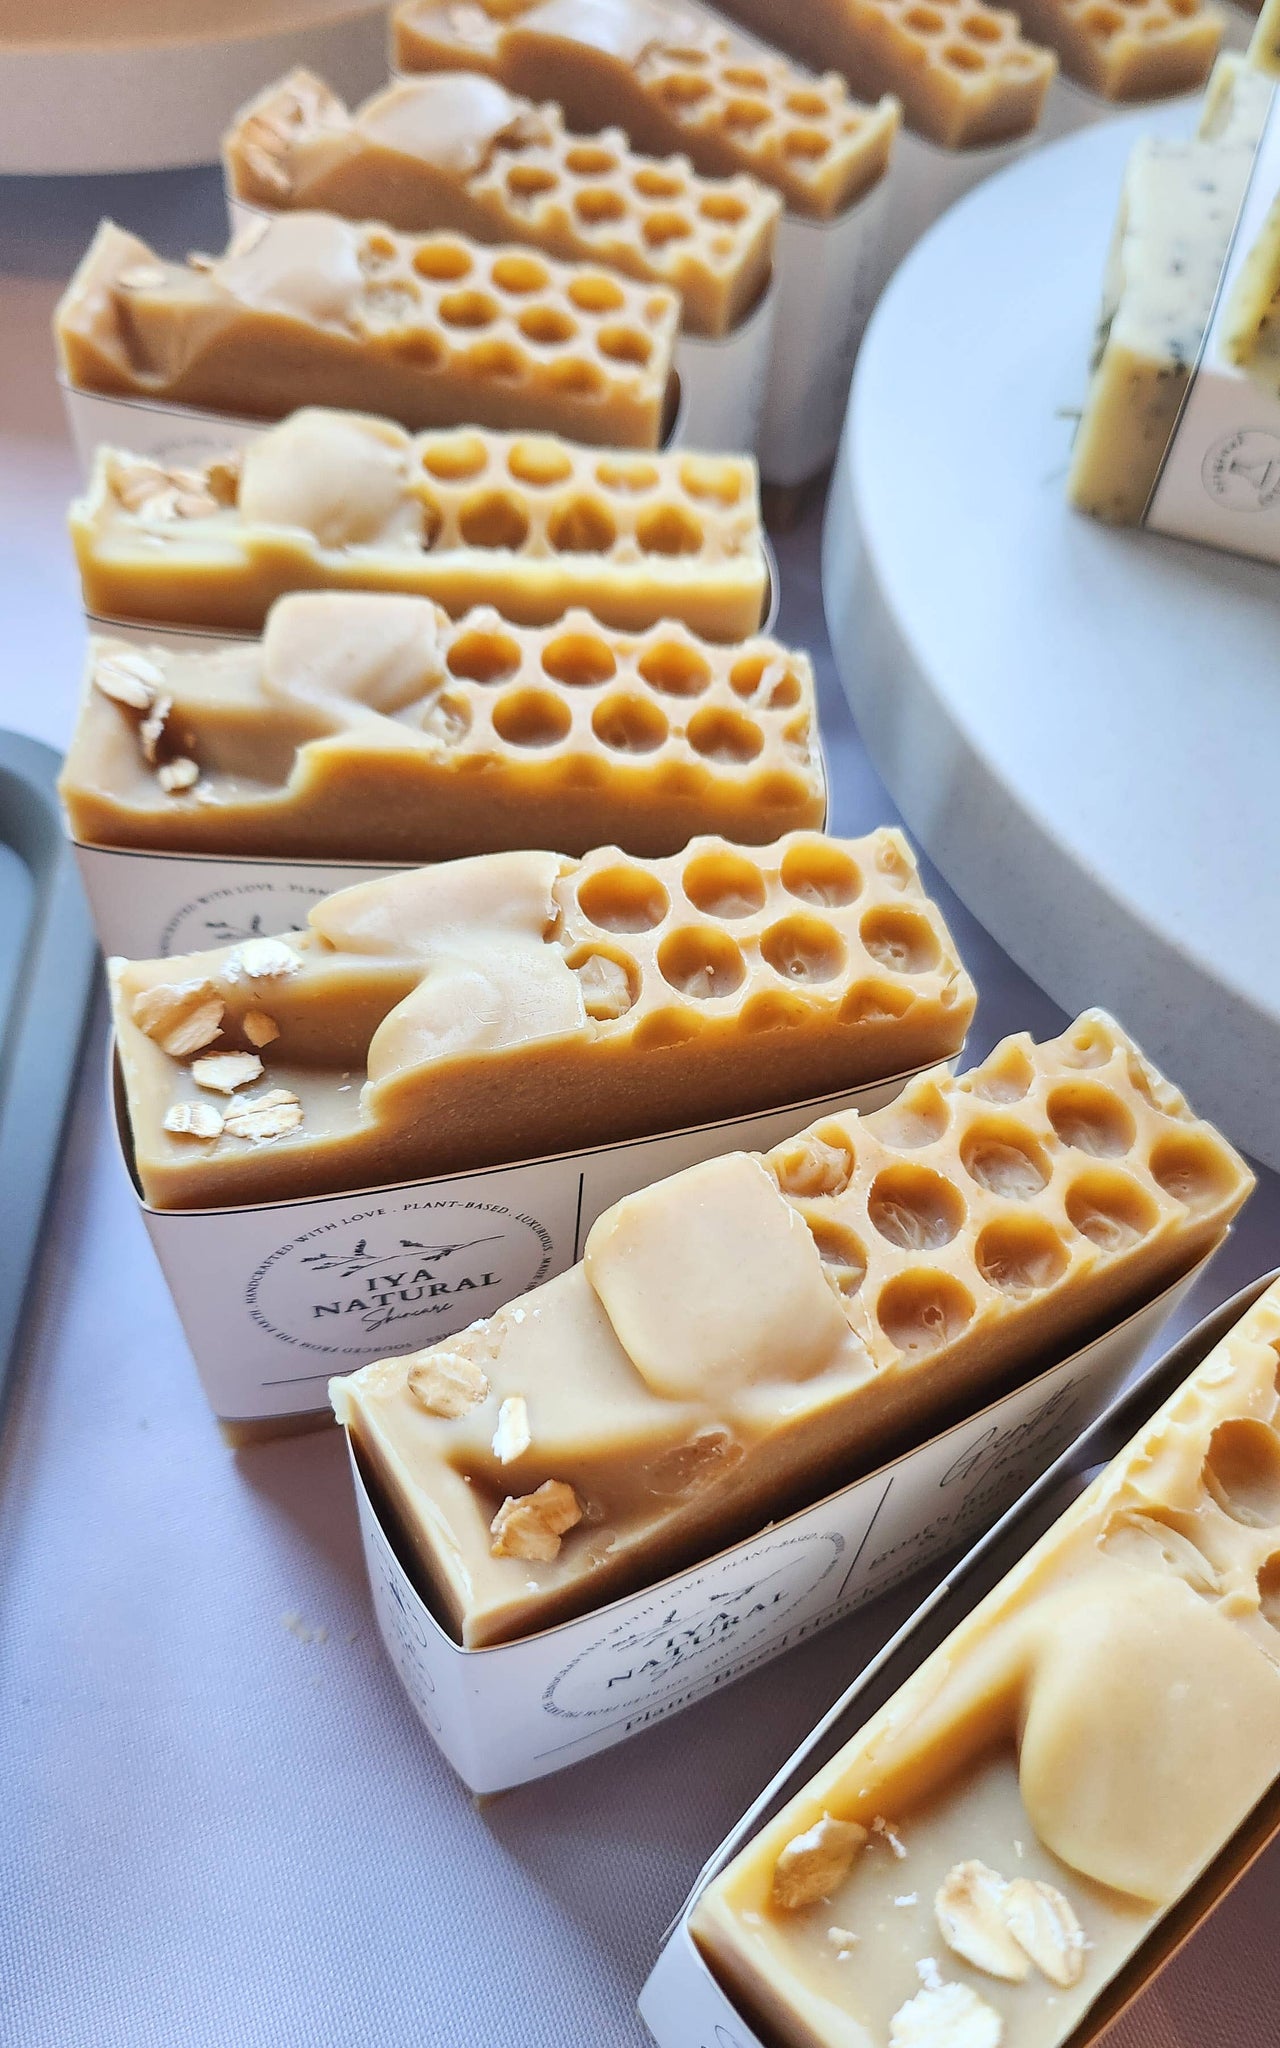 Iya Natural Skincare - Gentle Touch - Goat Milk Soap Bar